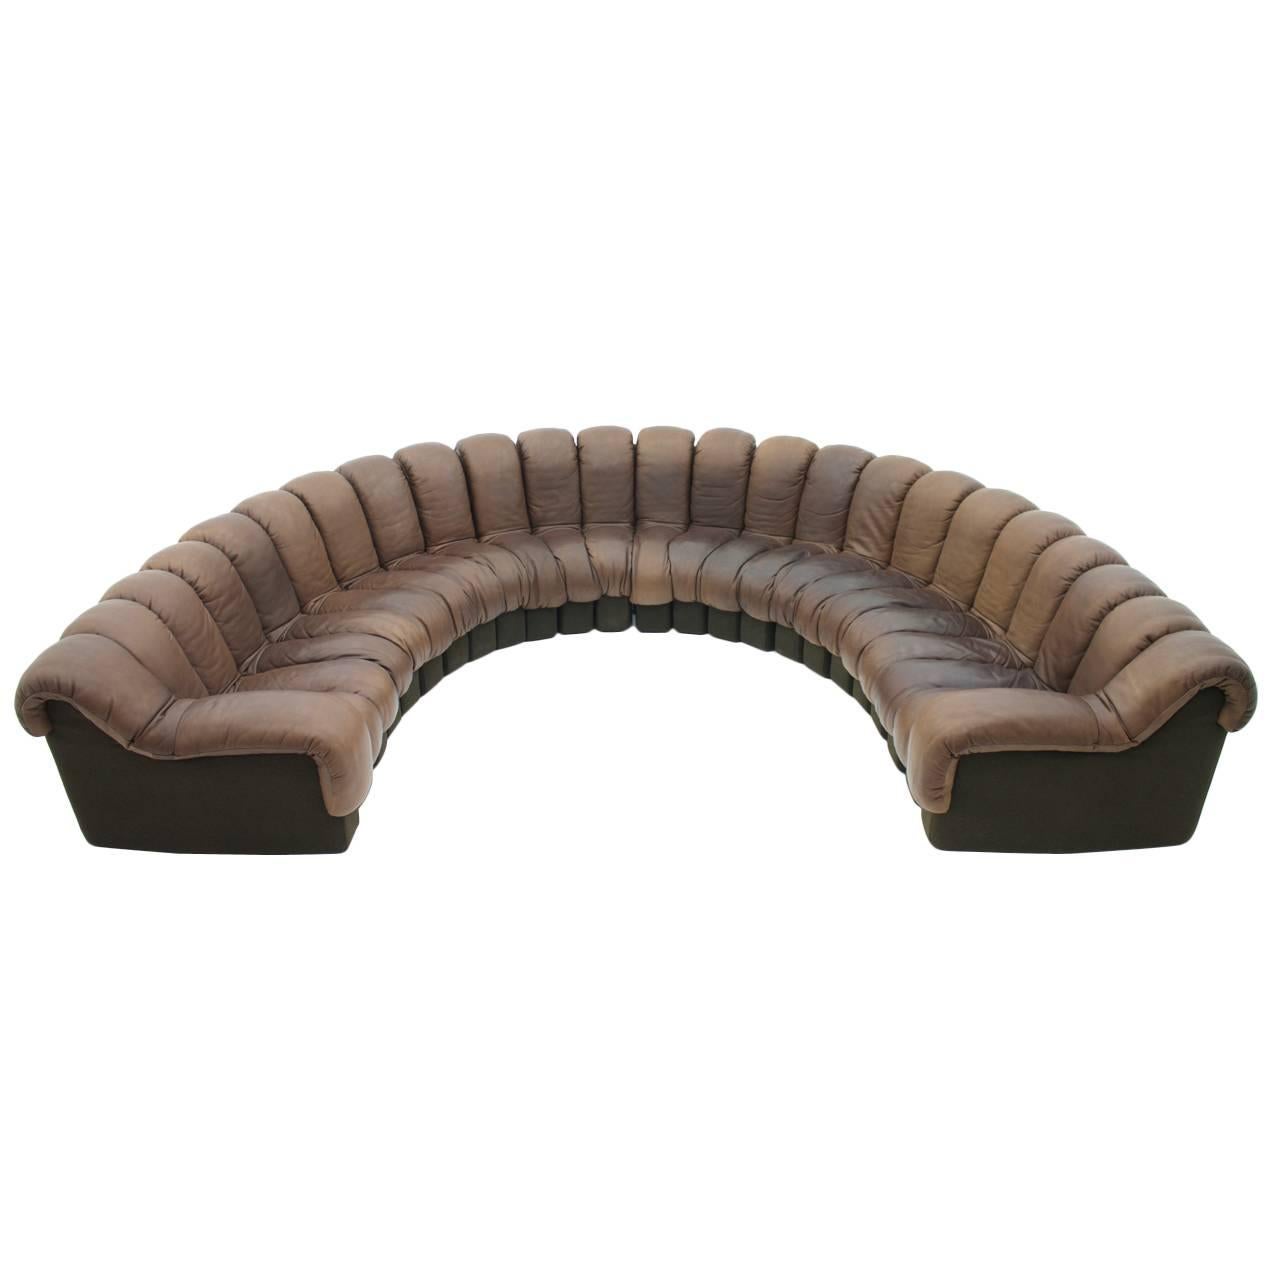 De Sede DS 600 Non Stop Sofa with 24 Elements Brown Leather Ueli Berger Endless